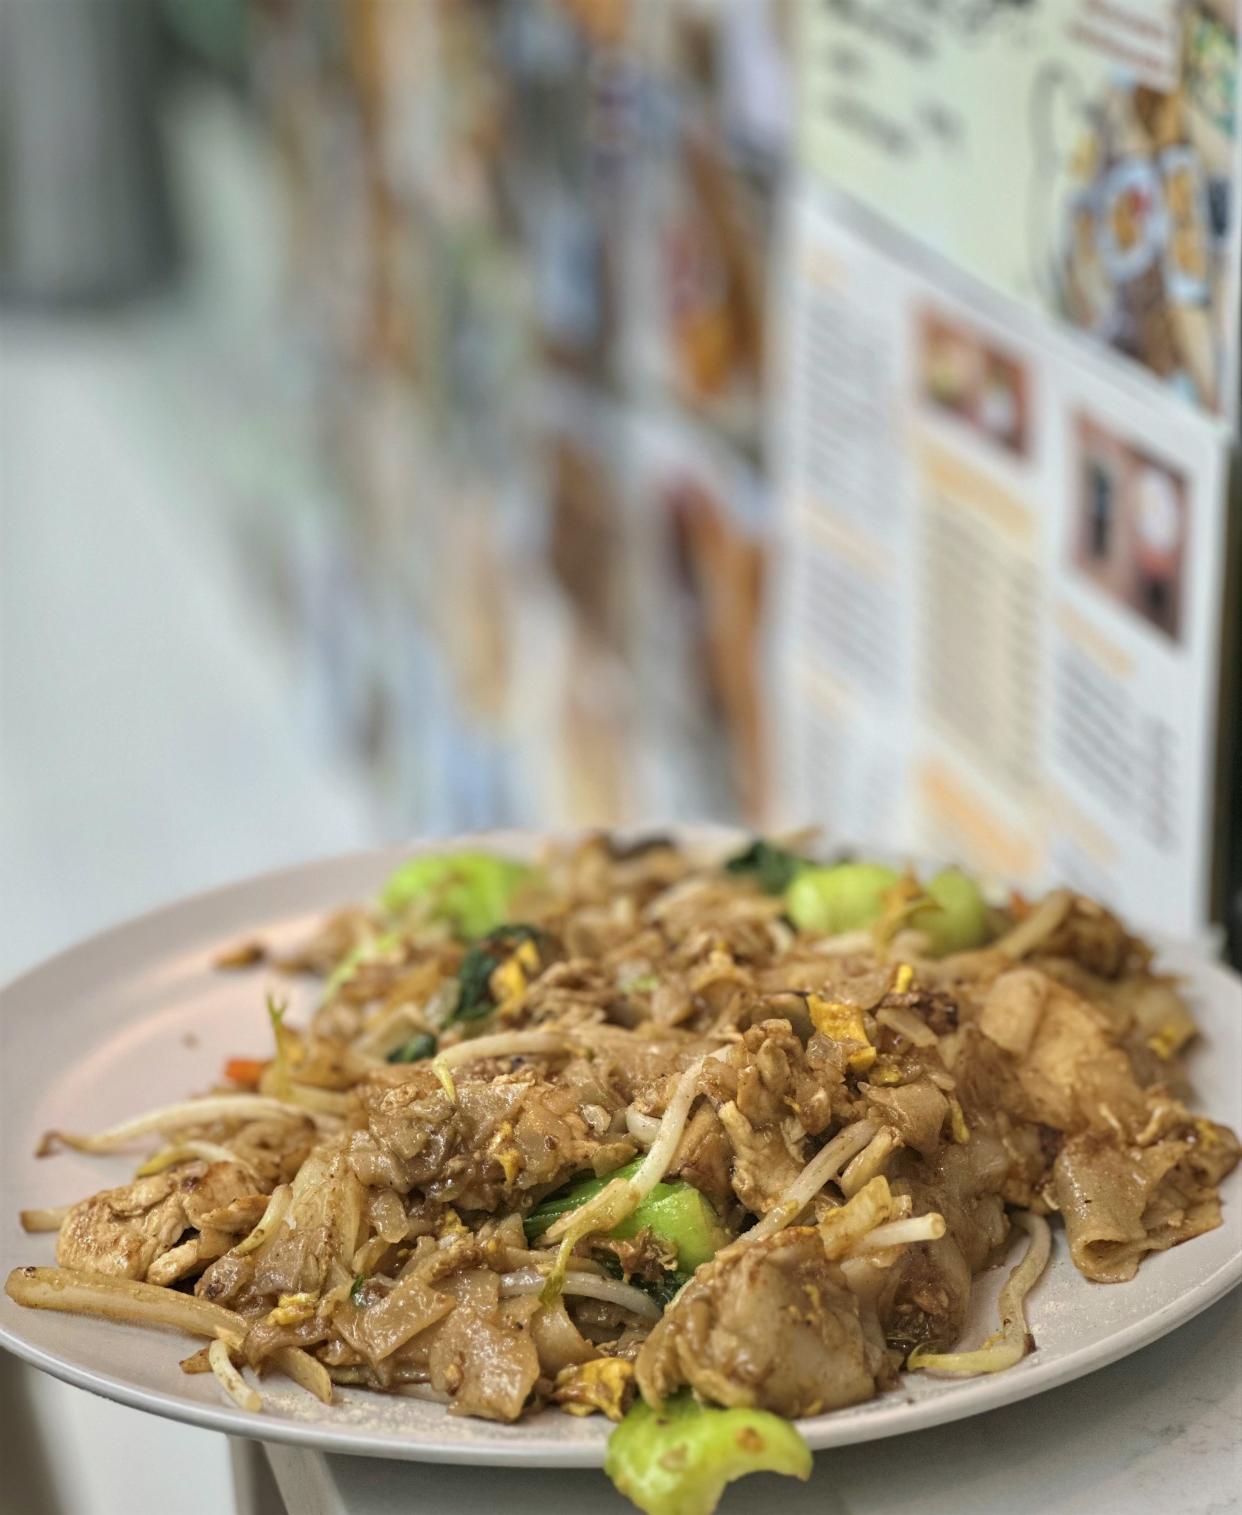 The wok imparts its smoky breath on dishes like char kway teow with chicken.